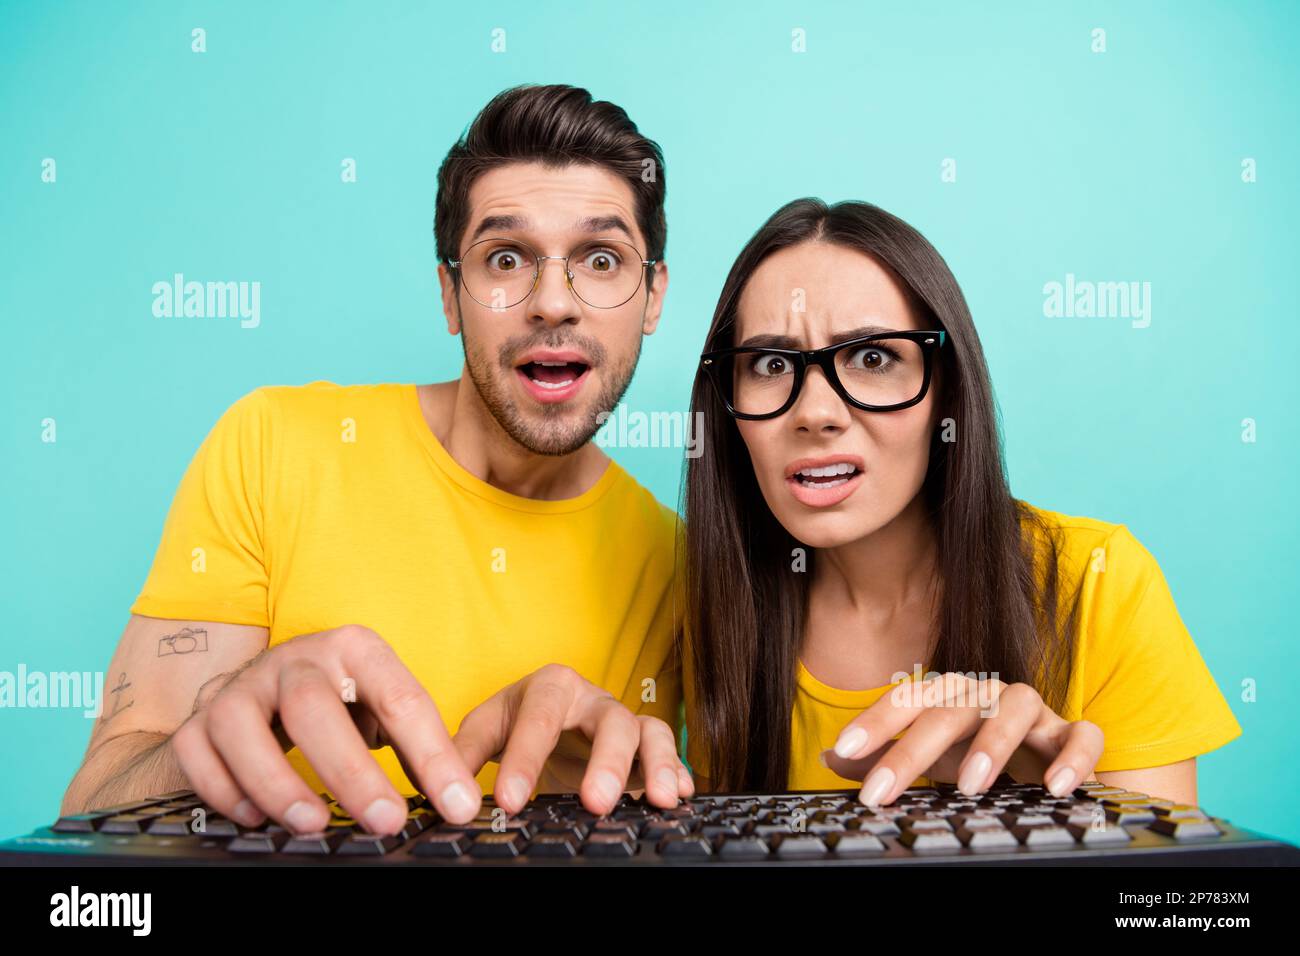 Closeup portrait of young geeks it specialists wear yellow t-shirt writing keyboard browsing esport betting isolated on aquamarine color background Stock Photo